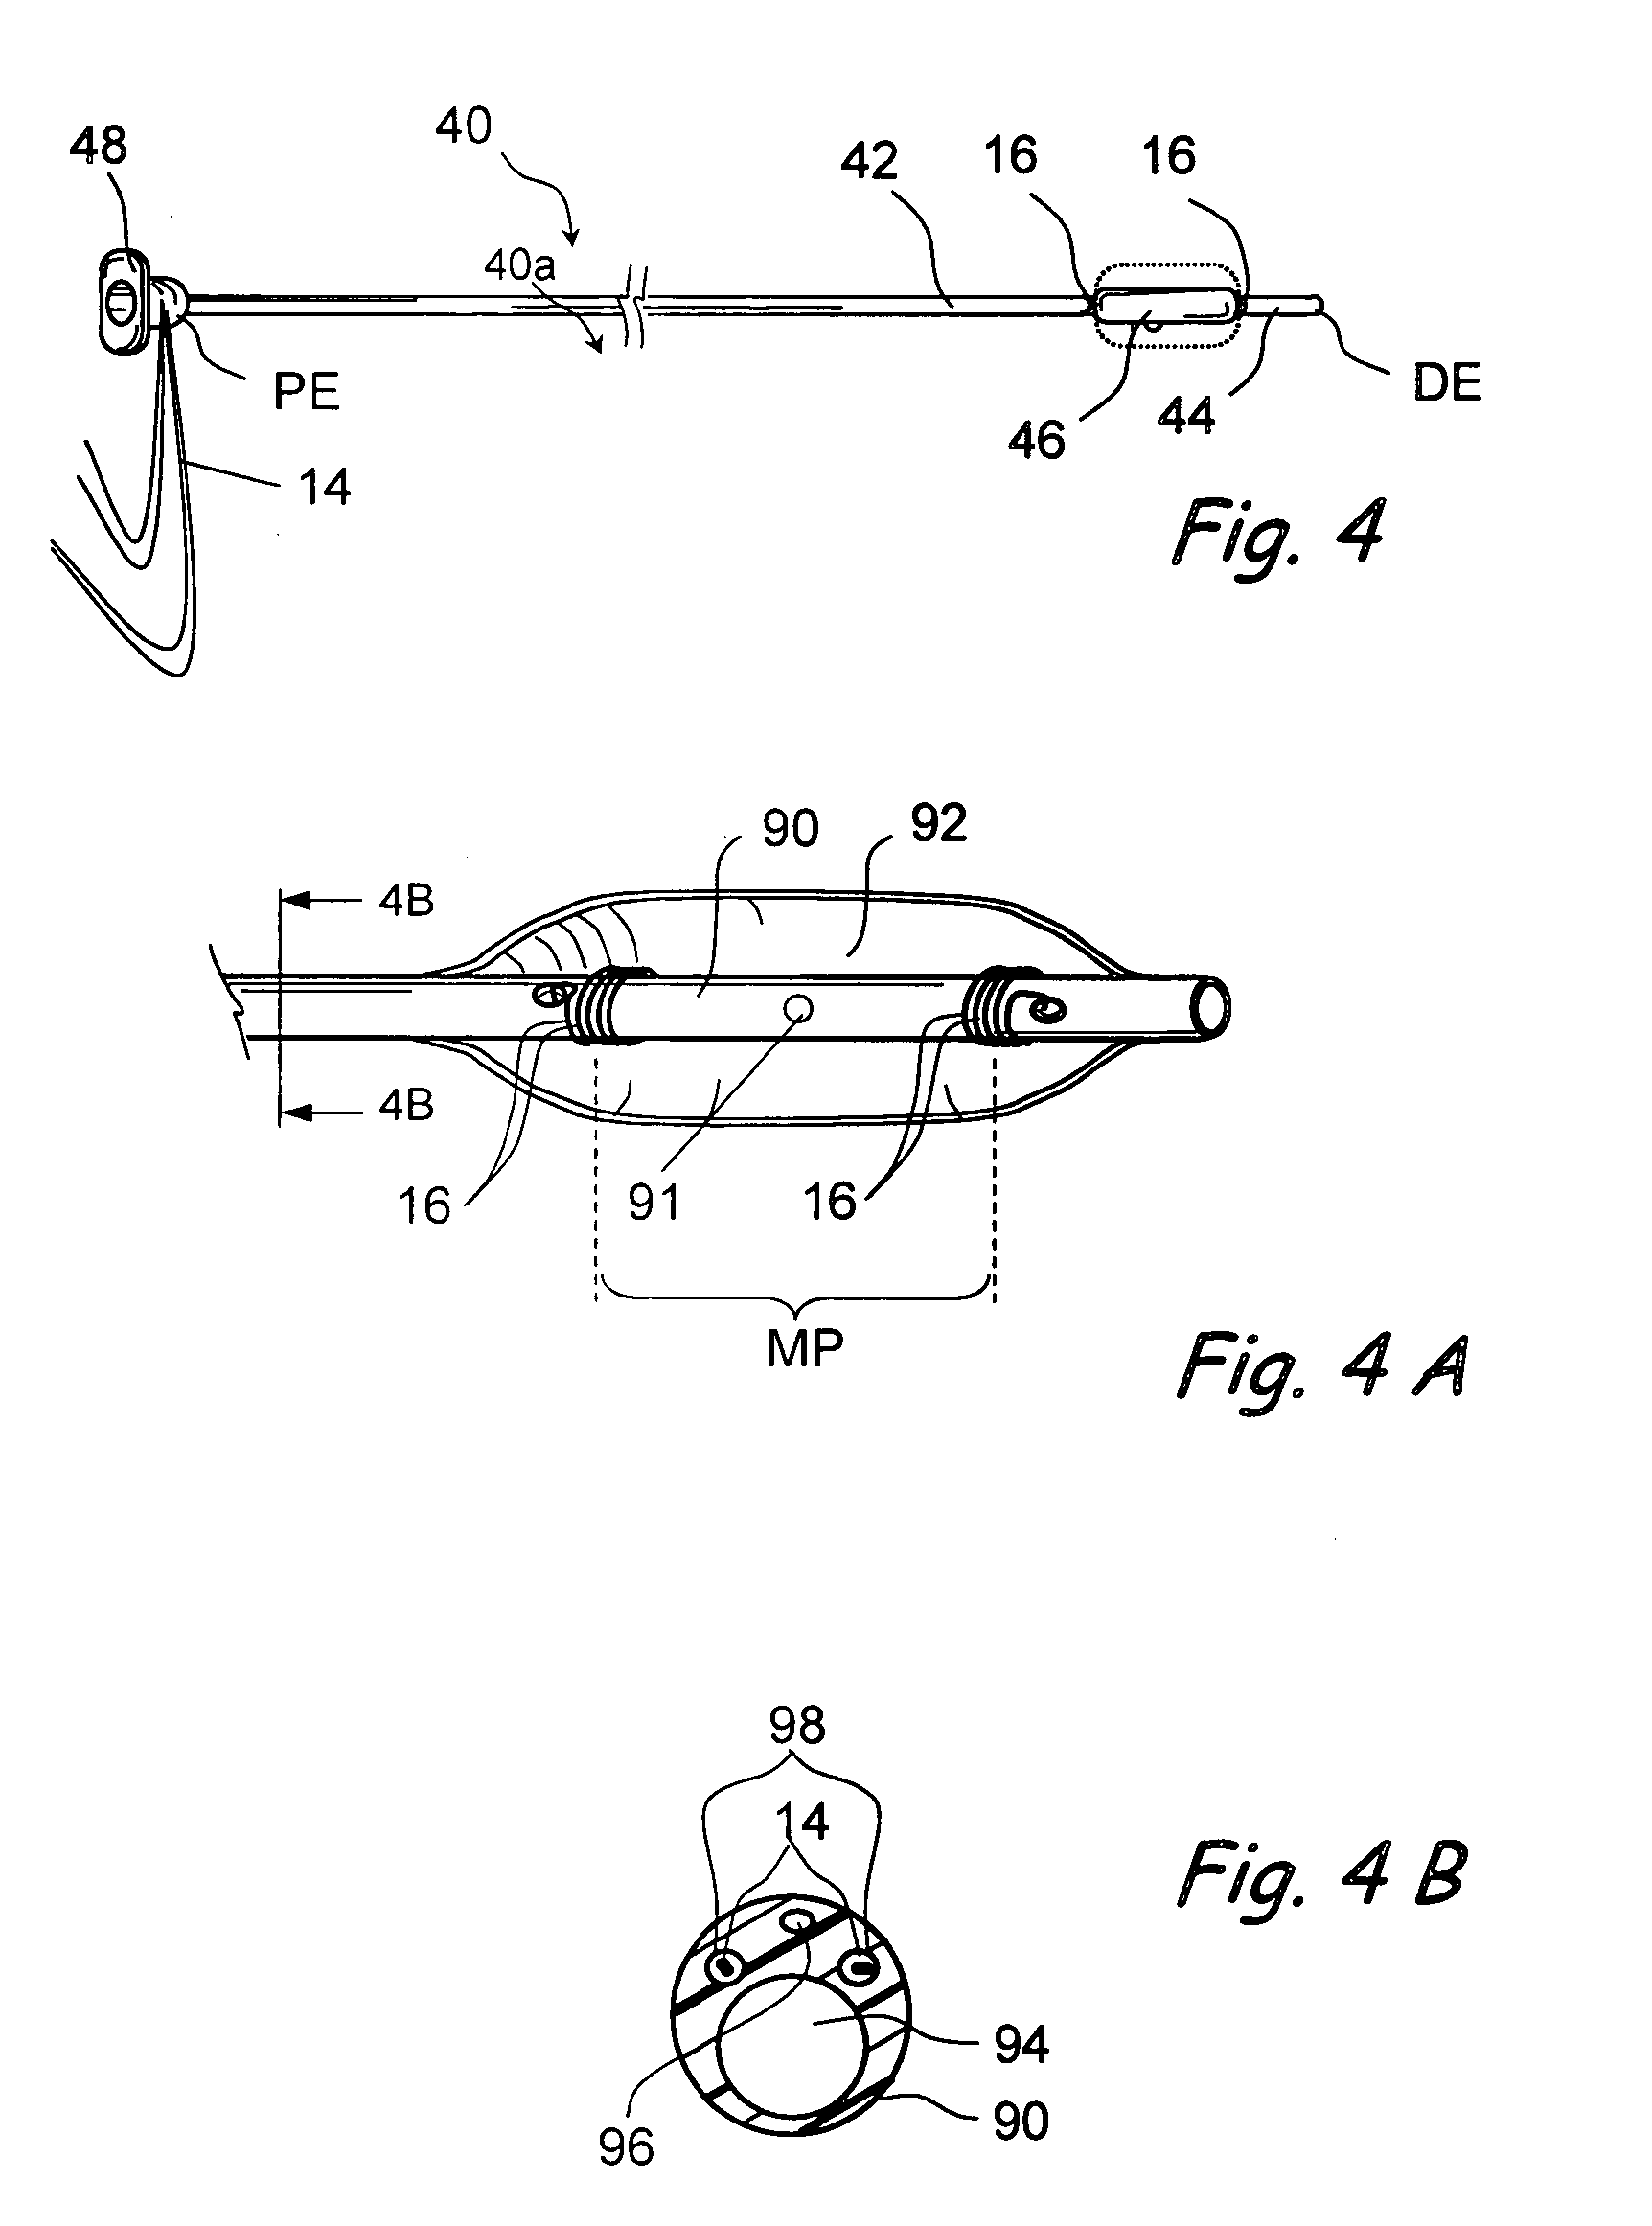 Systems and Methods for Performing Image Guided Procedures Within the Ear, Nose, Throat and Paranasal Sinuses